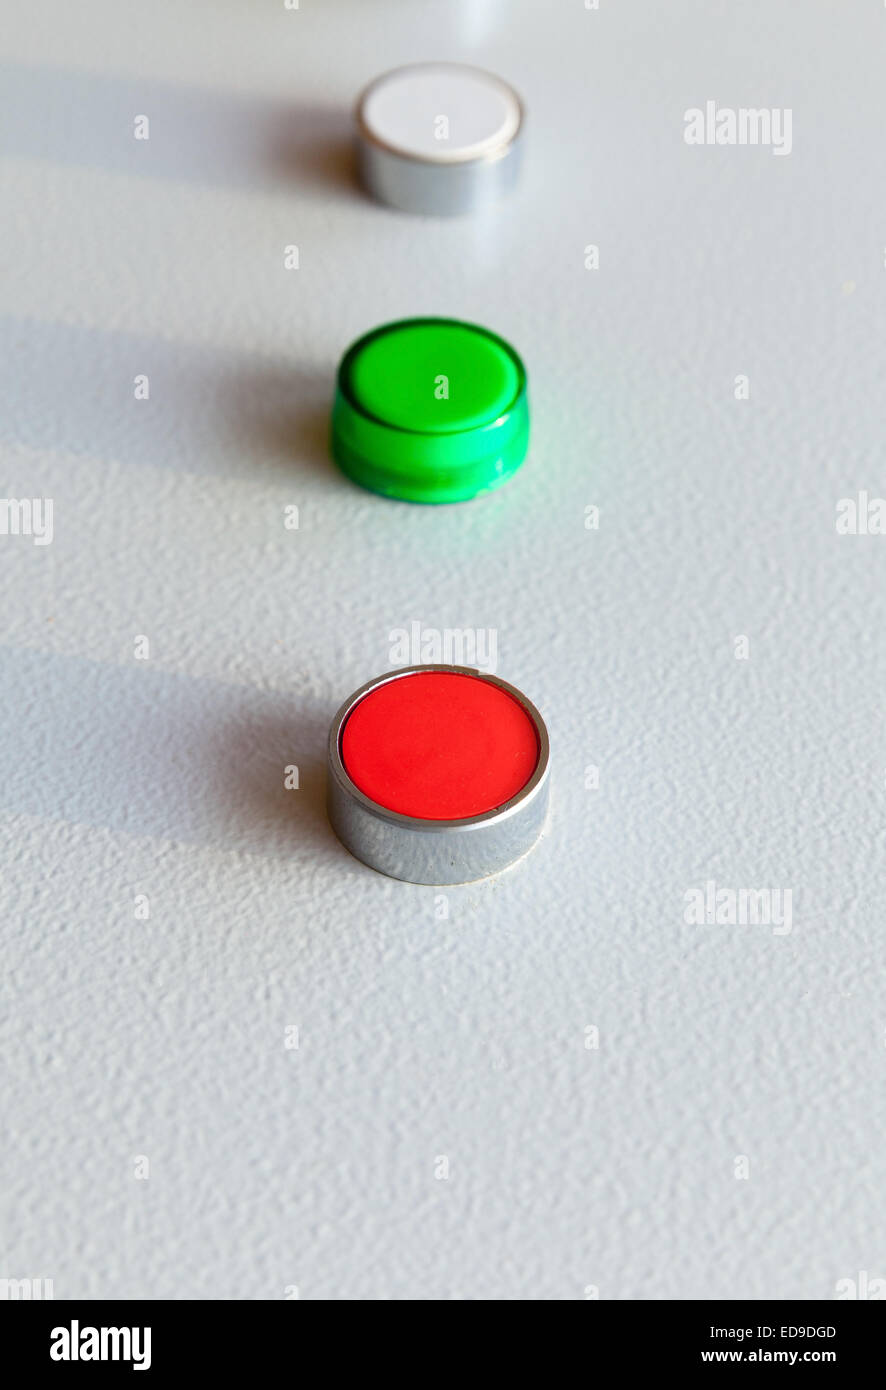 Three industrial buttons in a row on gray steel control panel Stock Photo